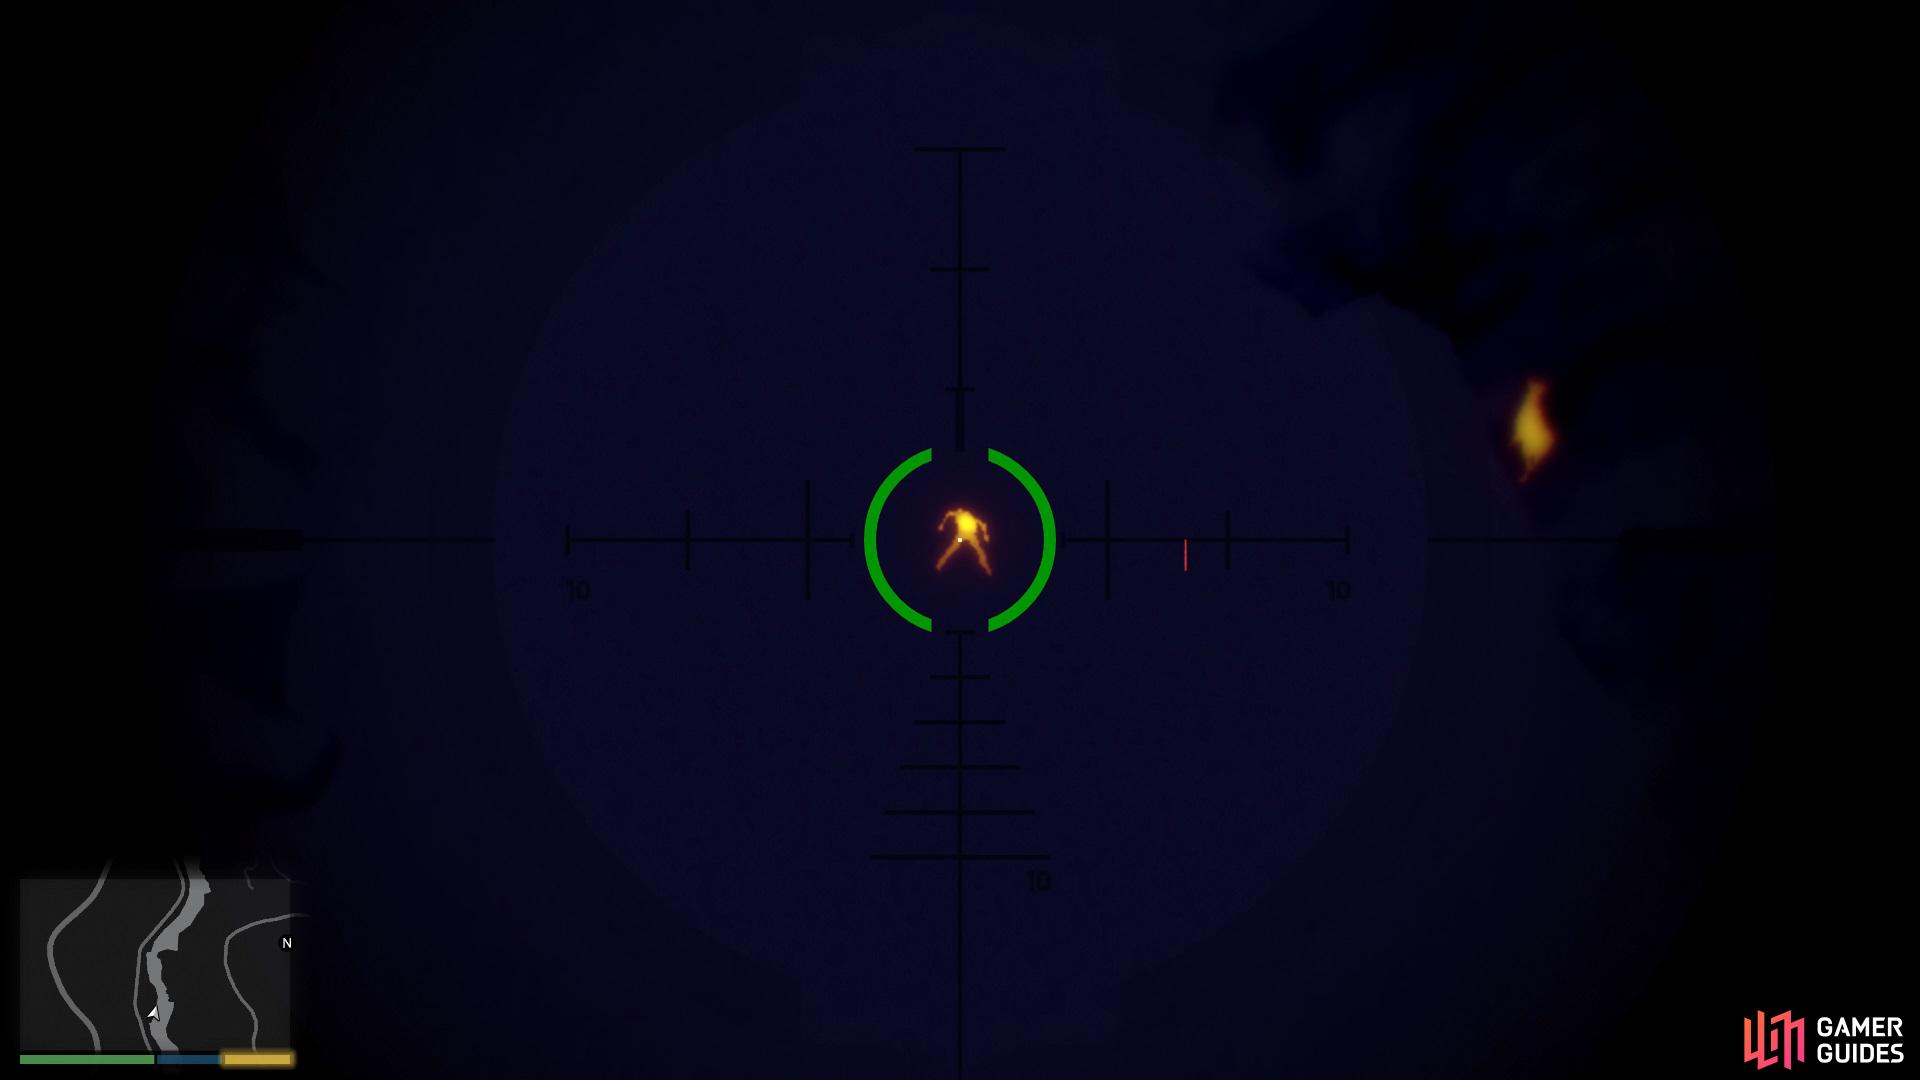 Use the thermal scope to find the enemies